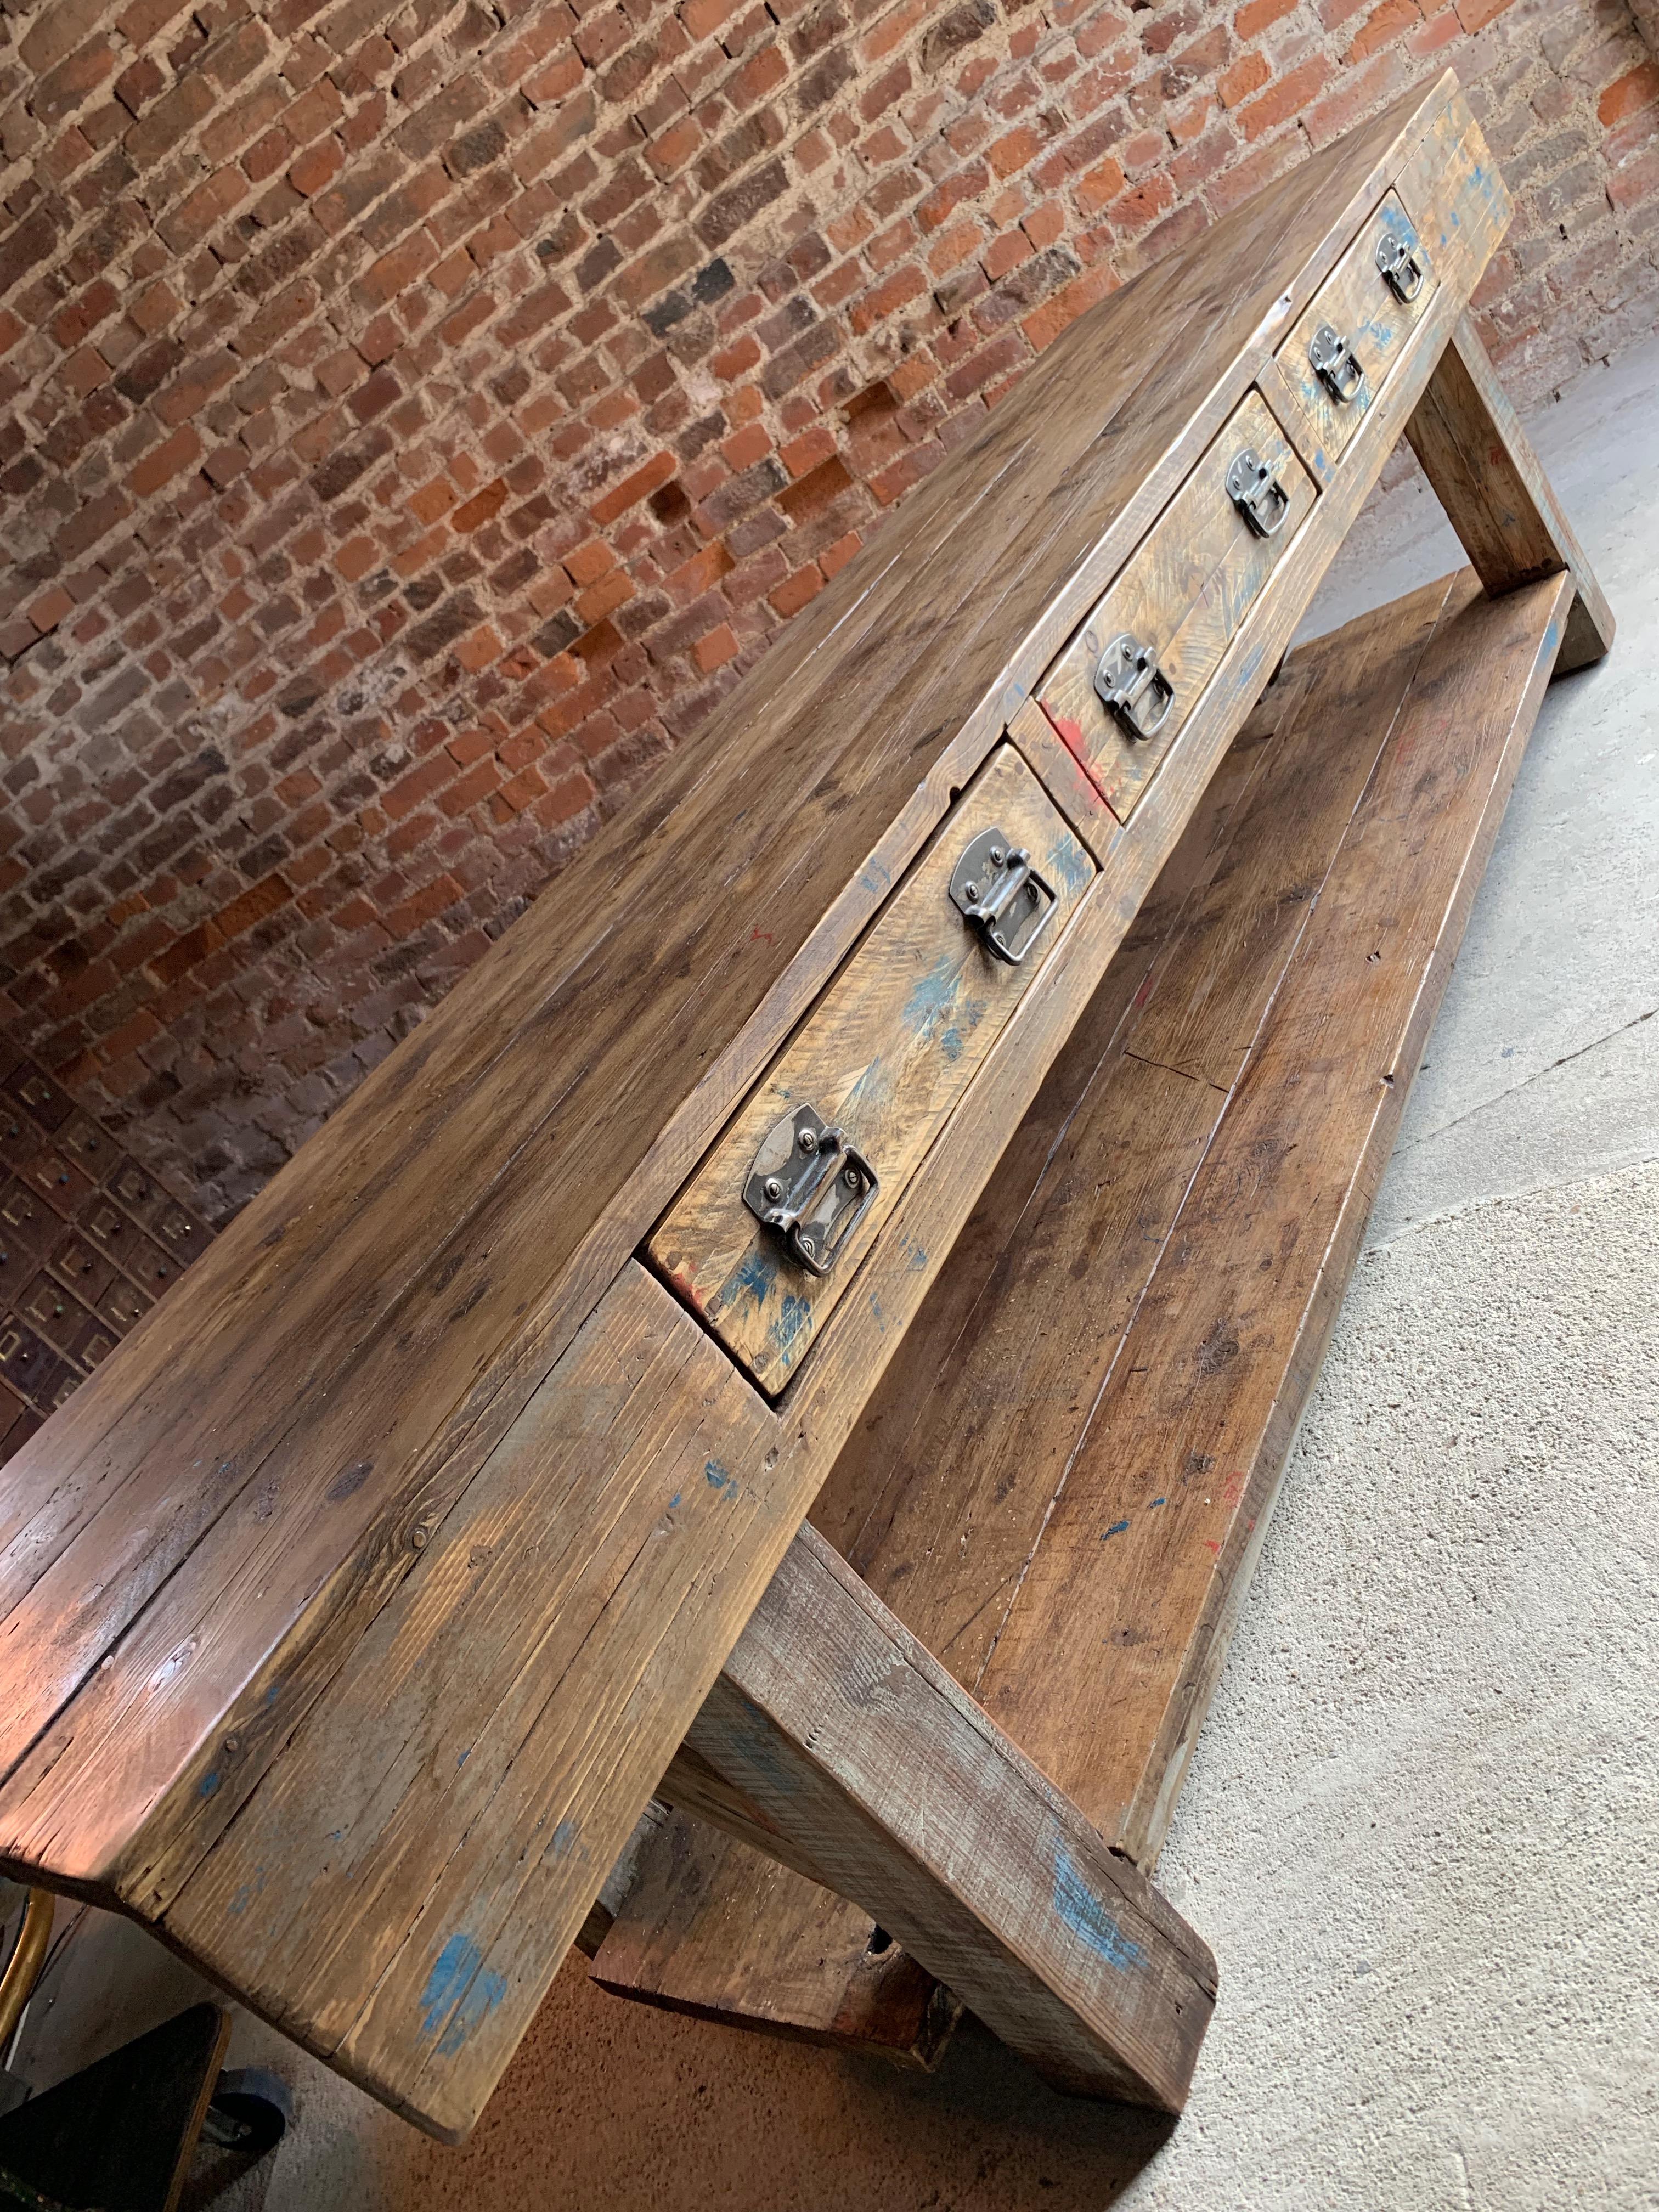 Mid-20th Century Industrial Table Oak and Pine Work Bench Sideboard Distressed Loft Style Antique